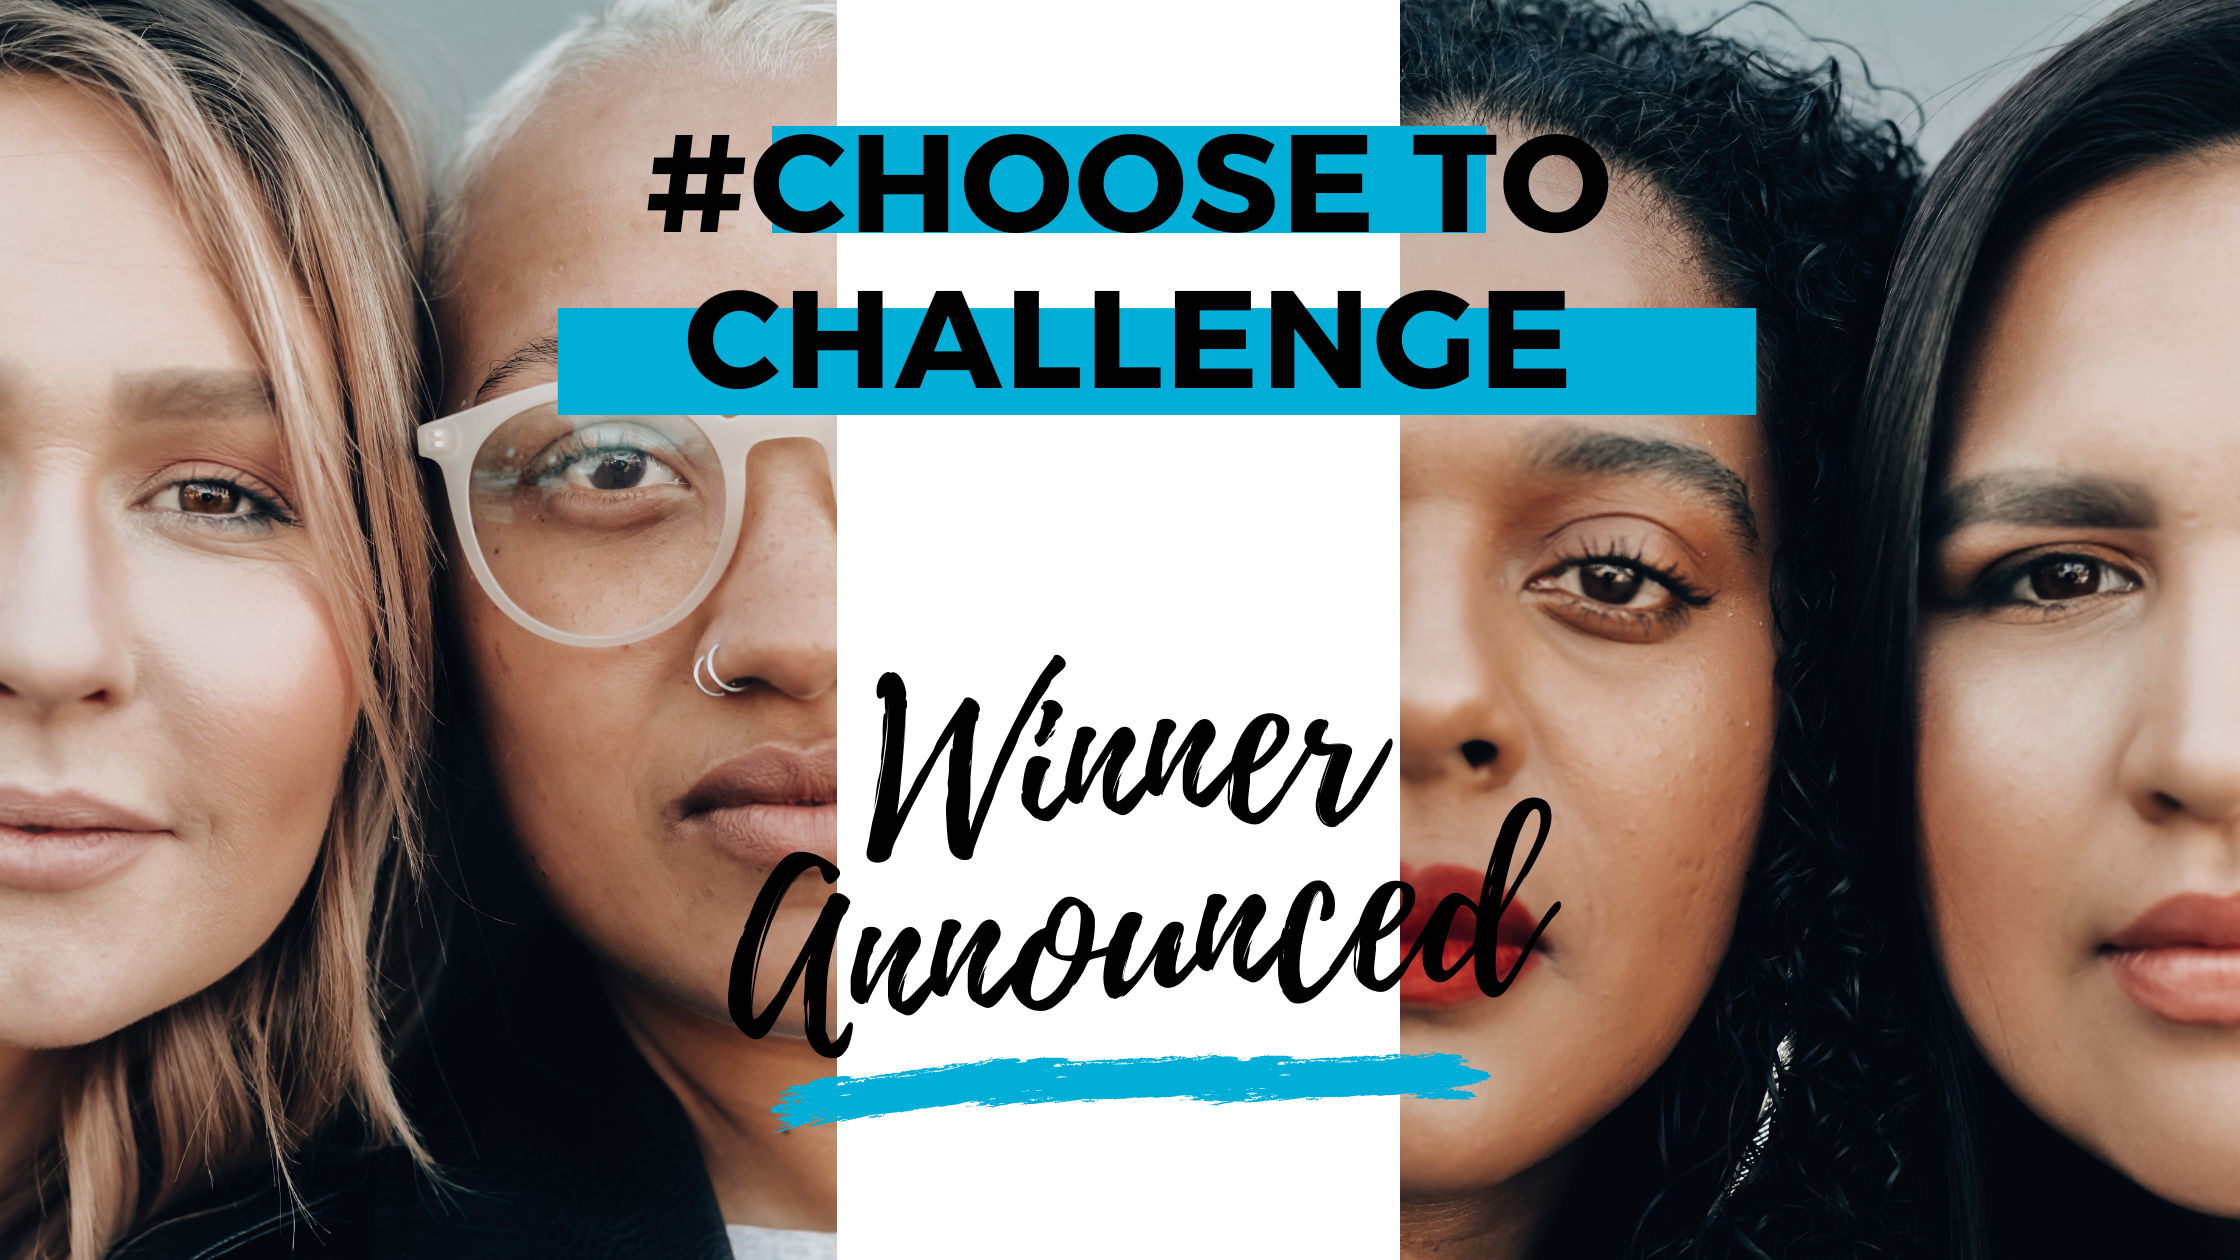 Choose to Challenge winner announced